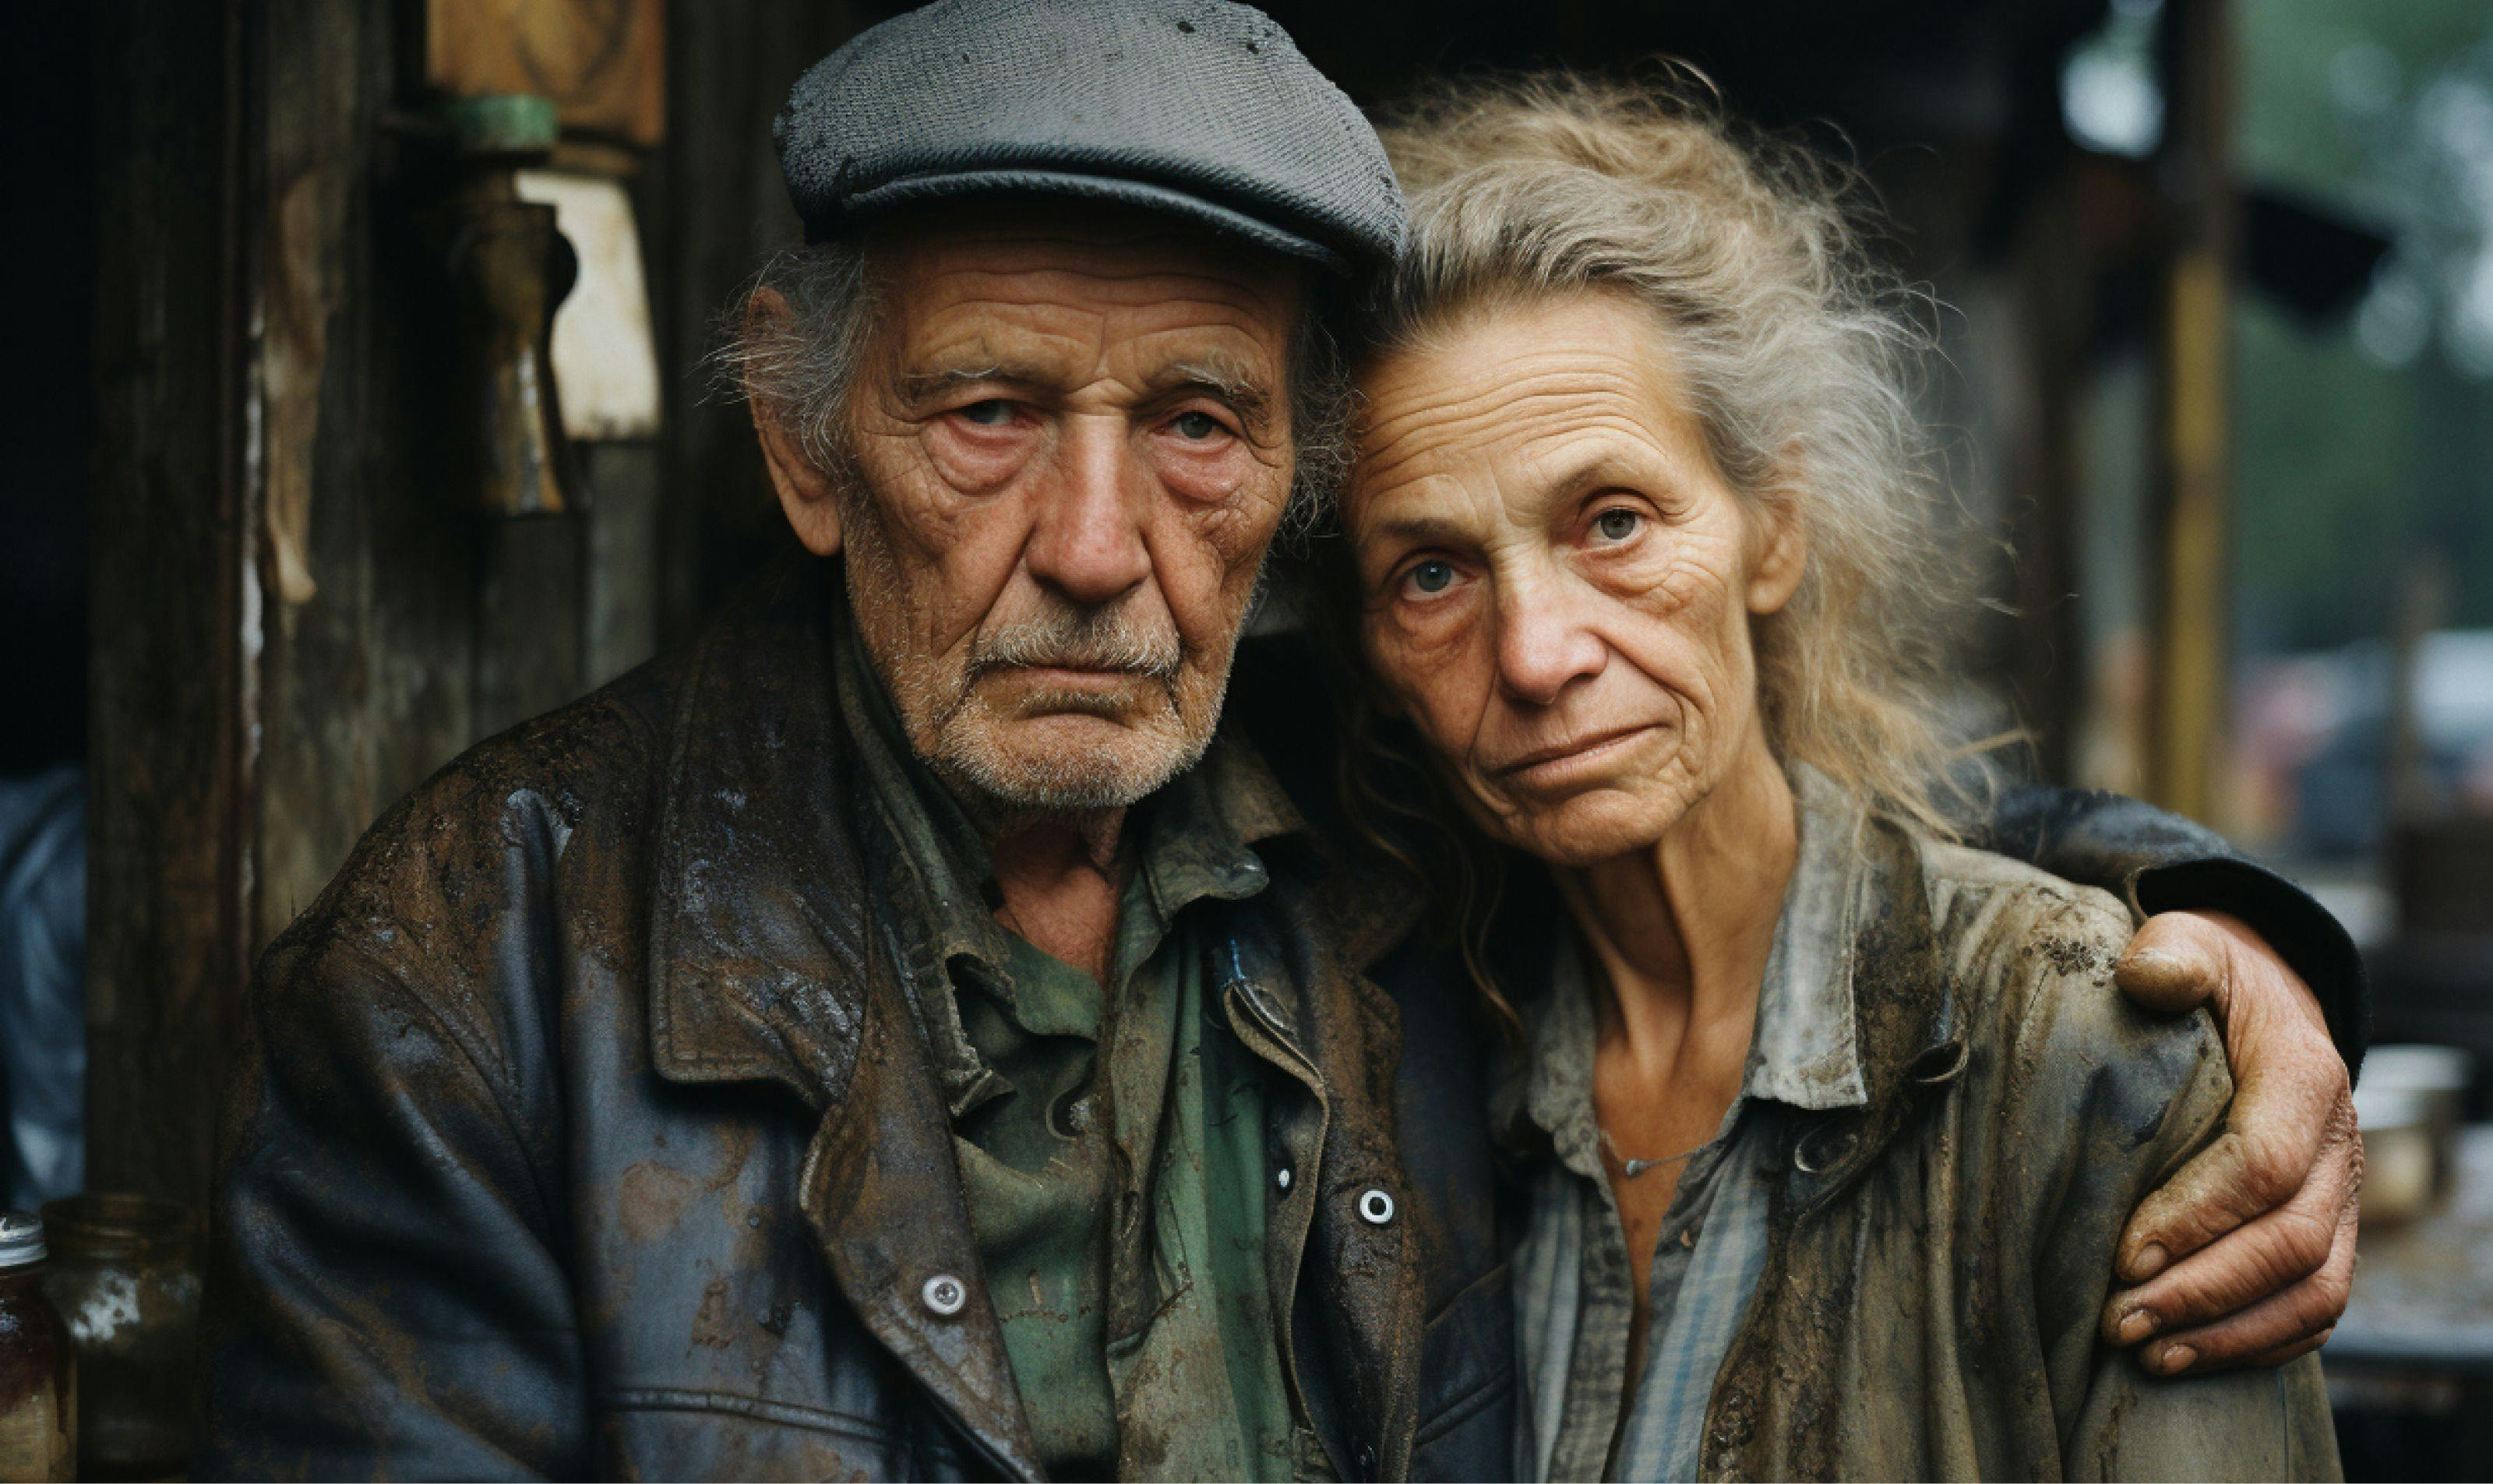 Photograph from 1990s Scotland showing an old bartender and his wife in their 60s